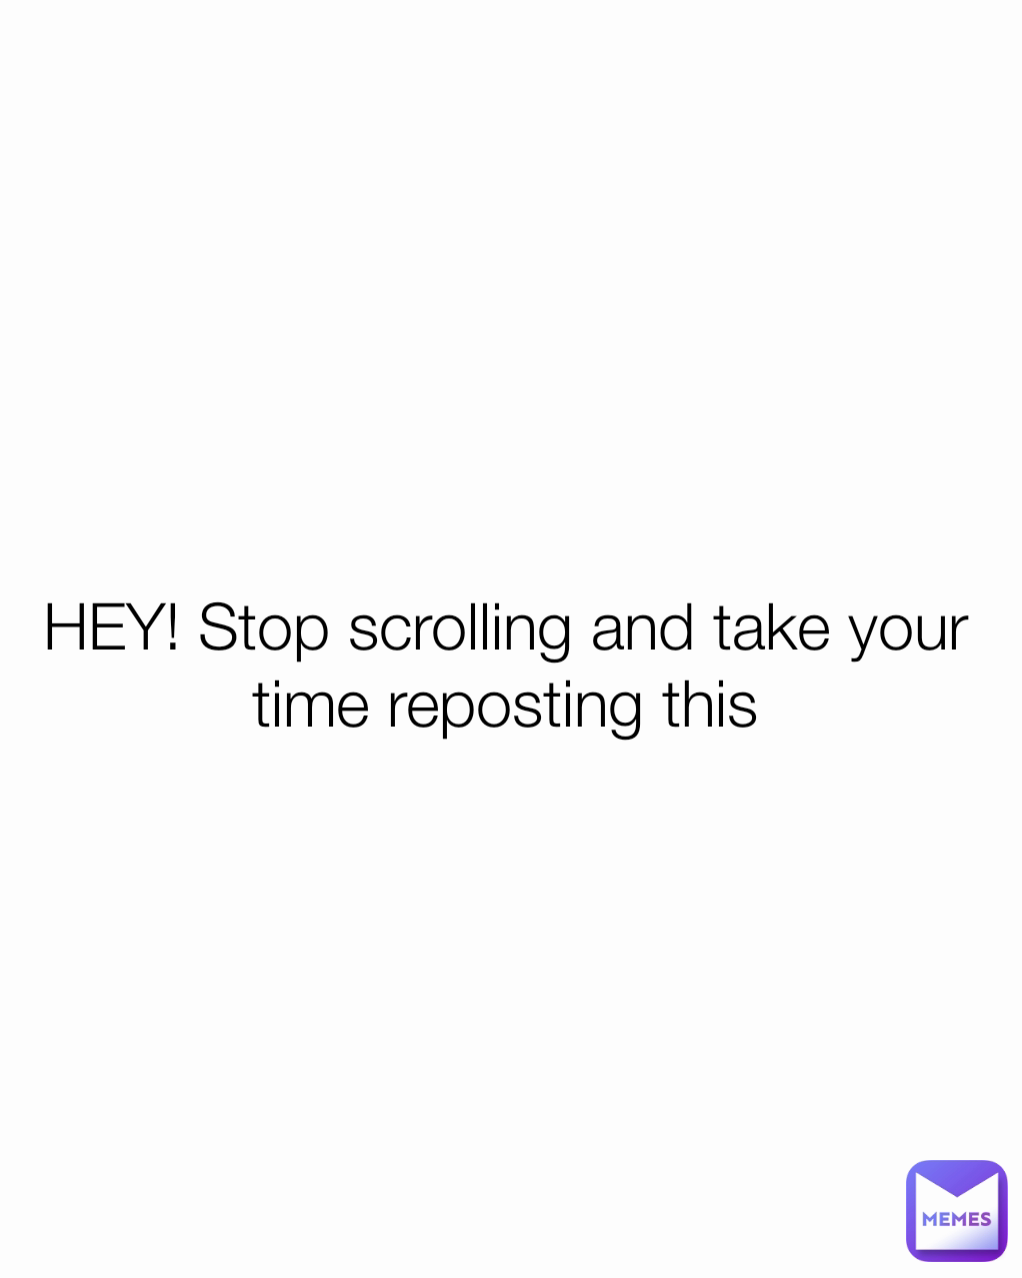 HEY! Stop scrolling and take your time reposting this